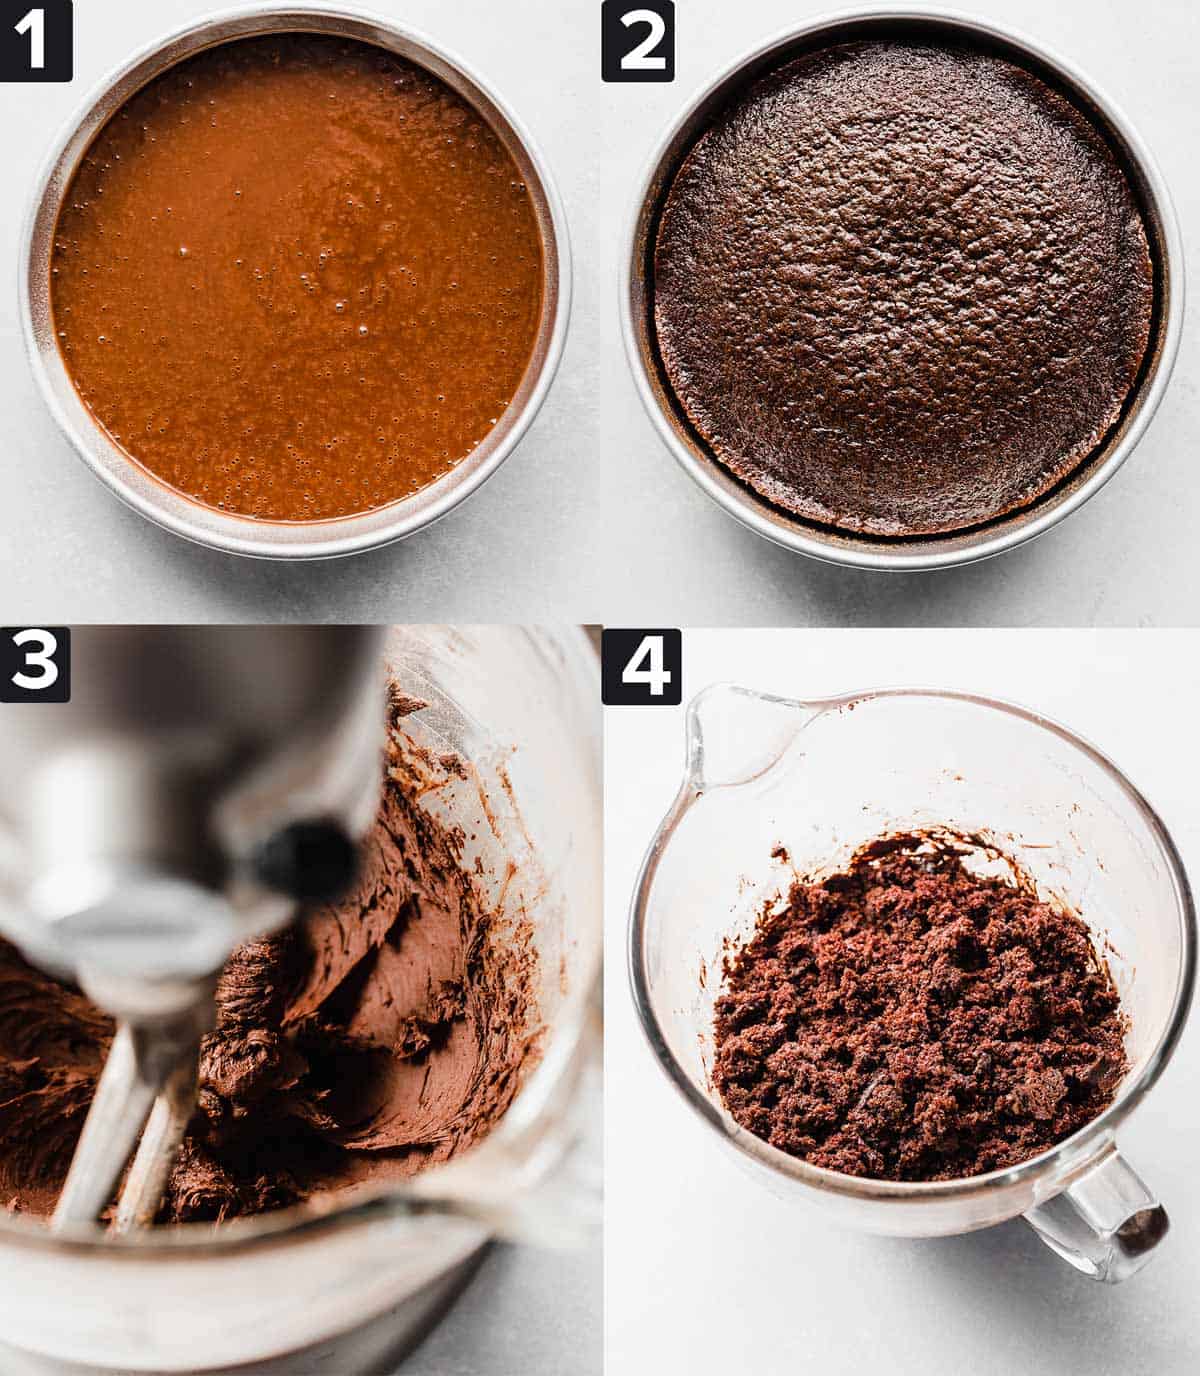 Four images showing how to make Chocolate Cake Pops: top two images show a circle cake pan filled with batter, then baked, bottom images show making of frosting and a glass bowl with crumbled cake in it.